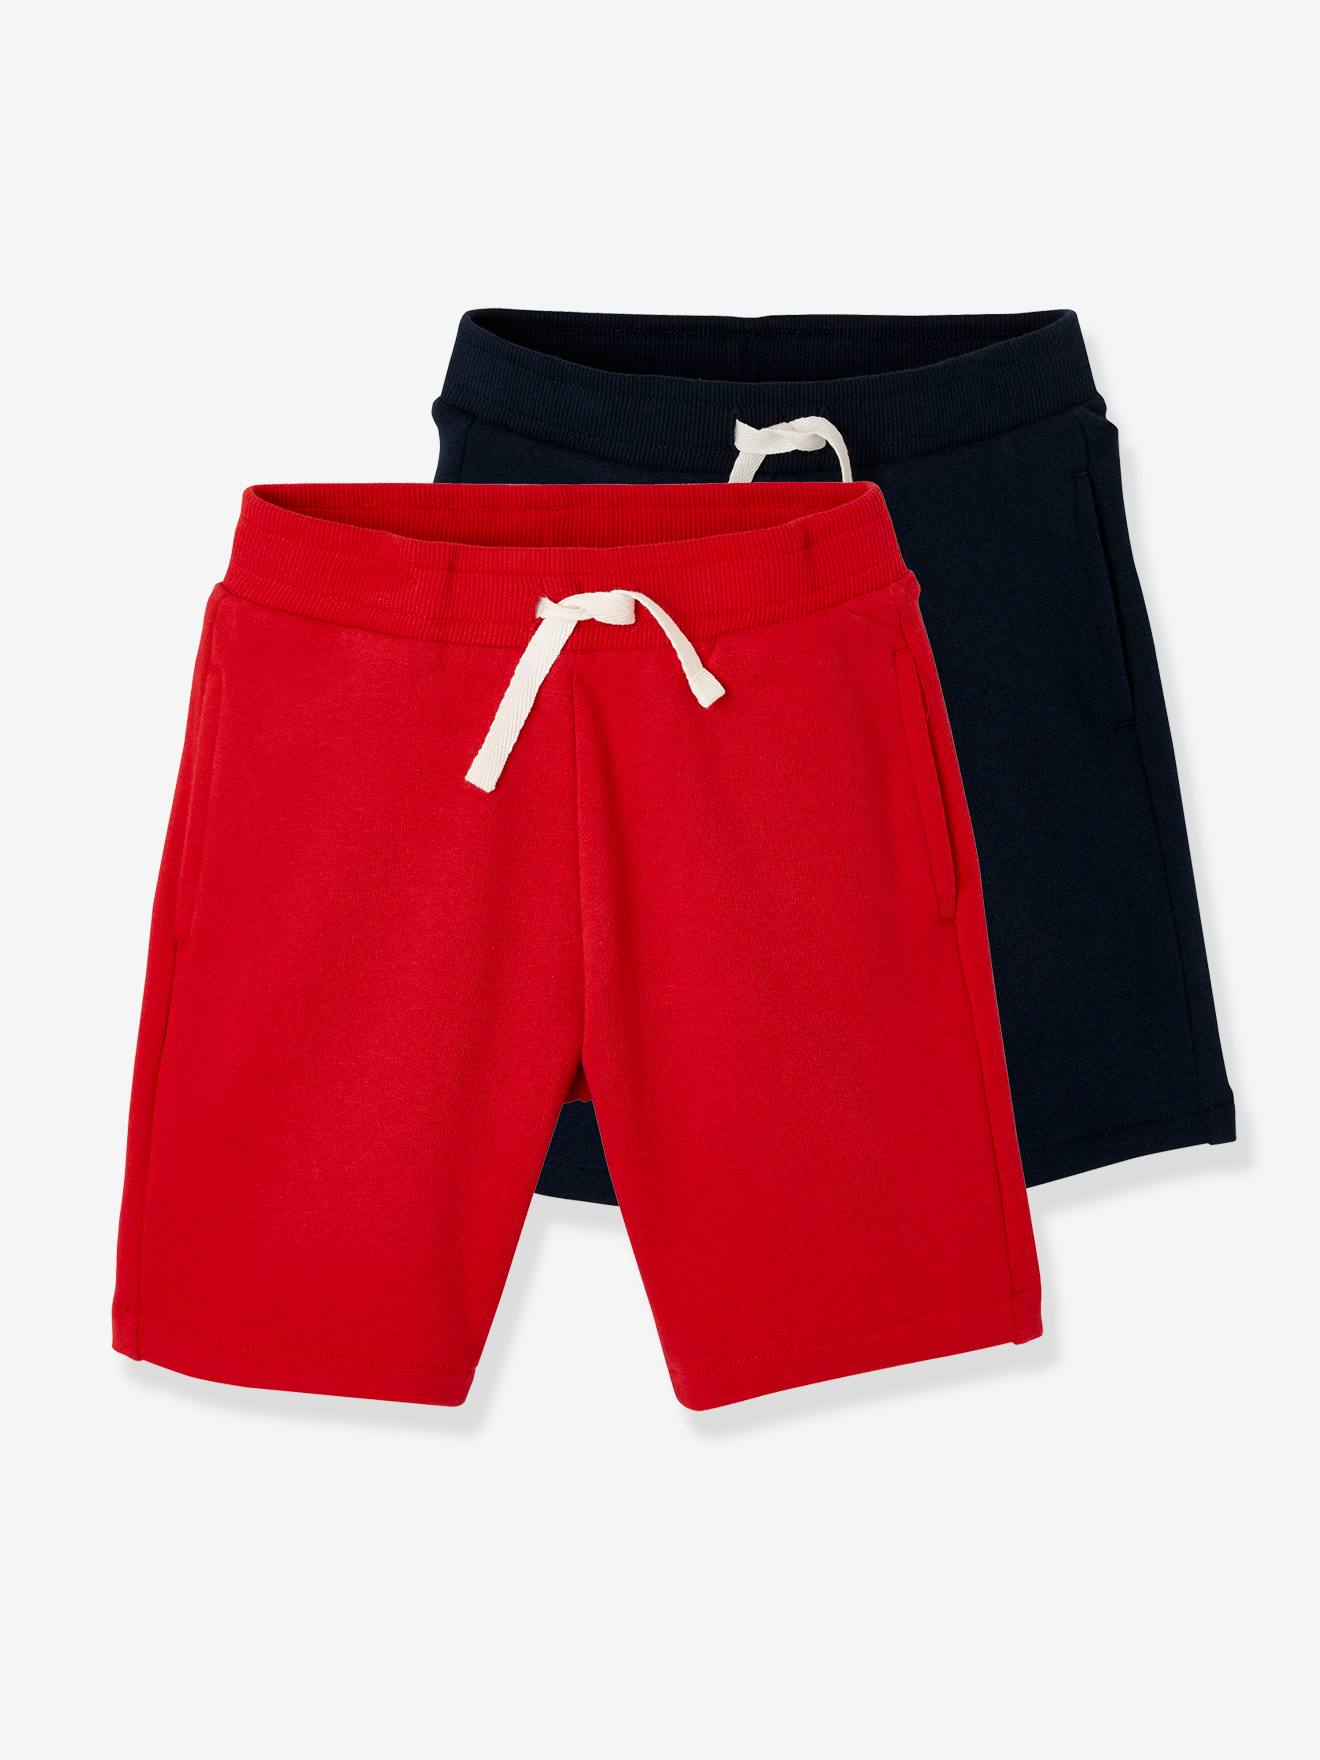 Pack of 2 Fleece Bermuda Shorts for Boys red